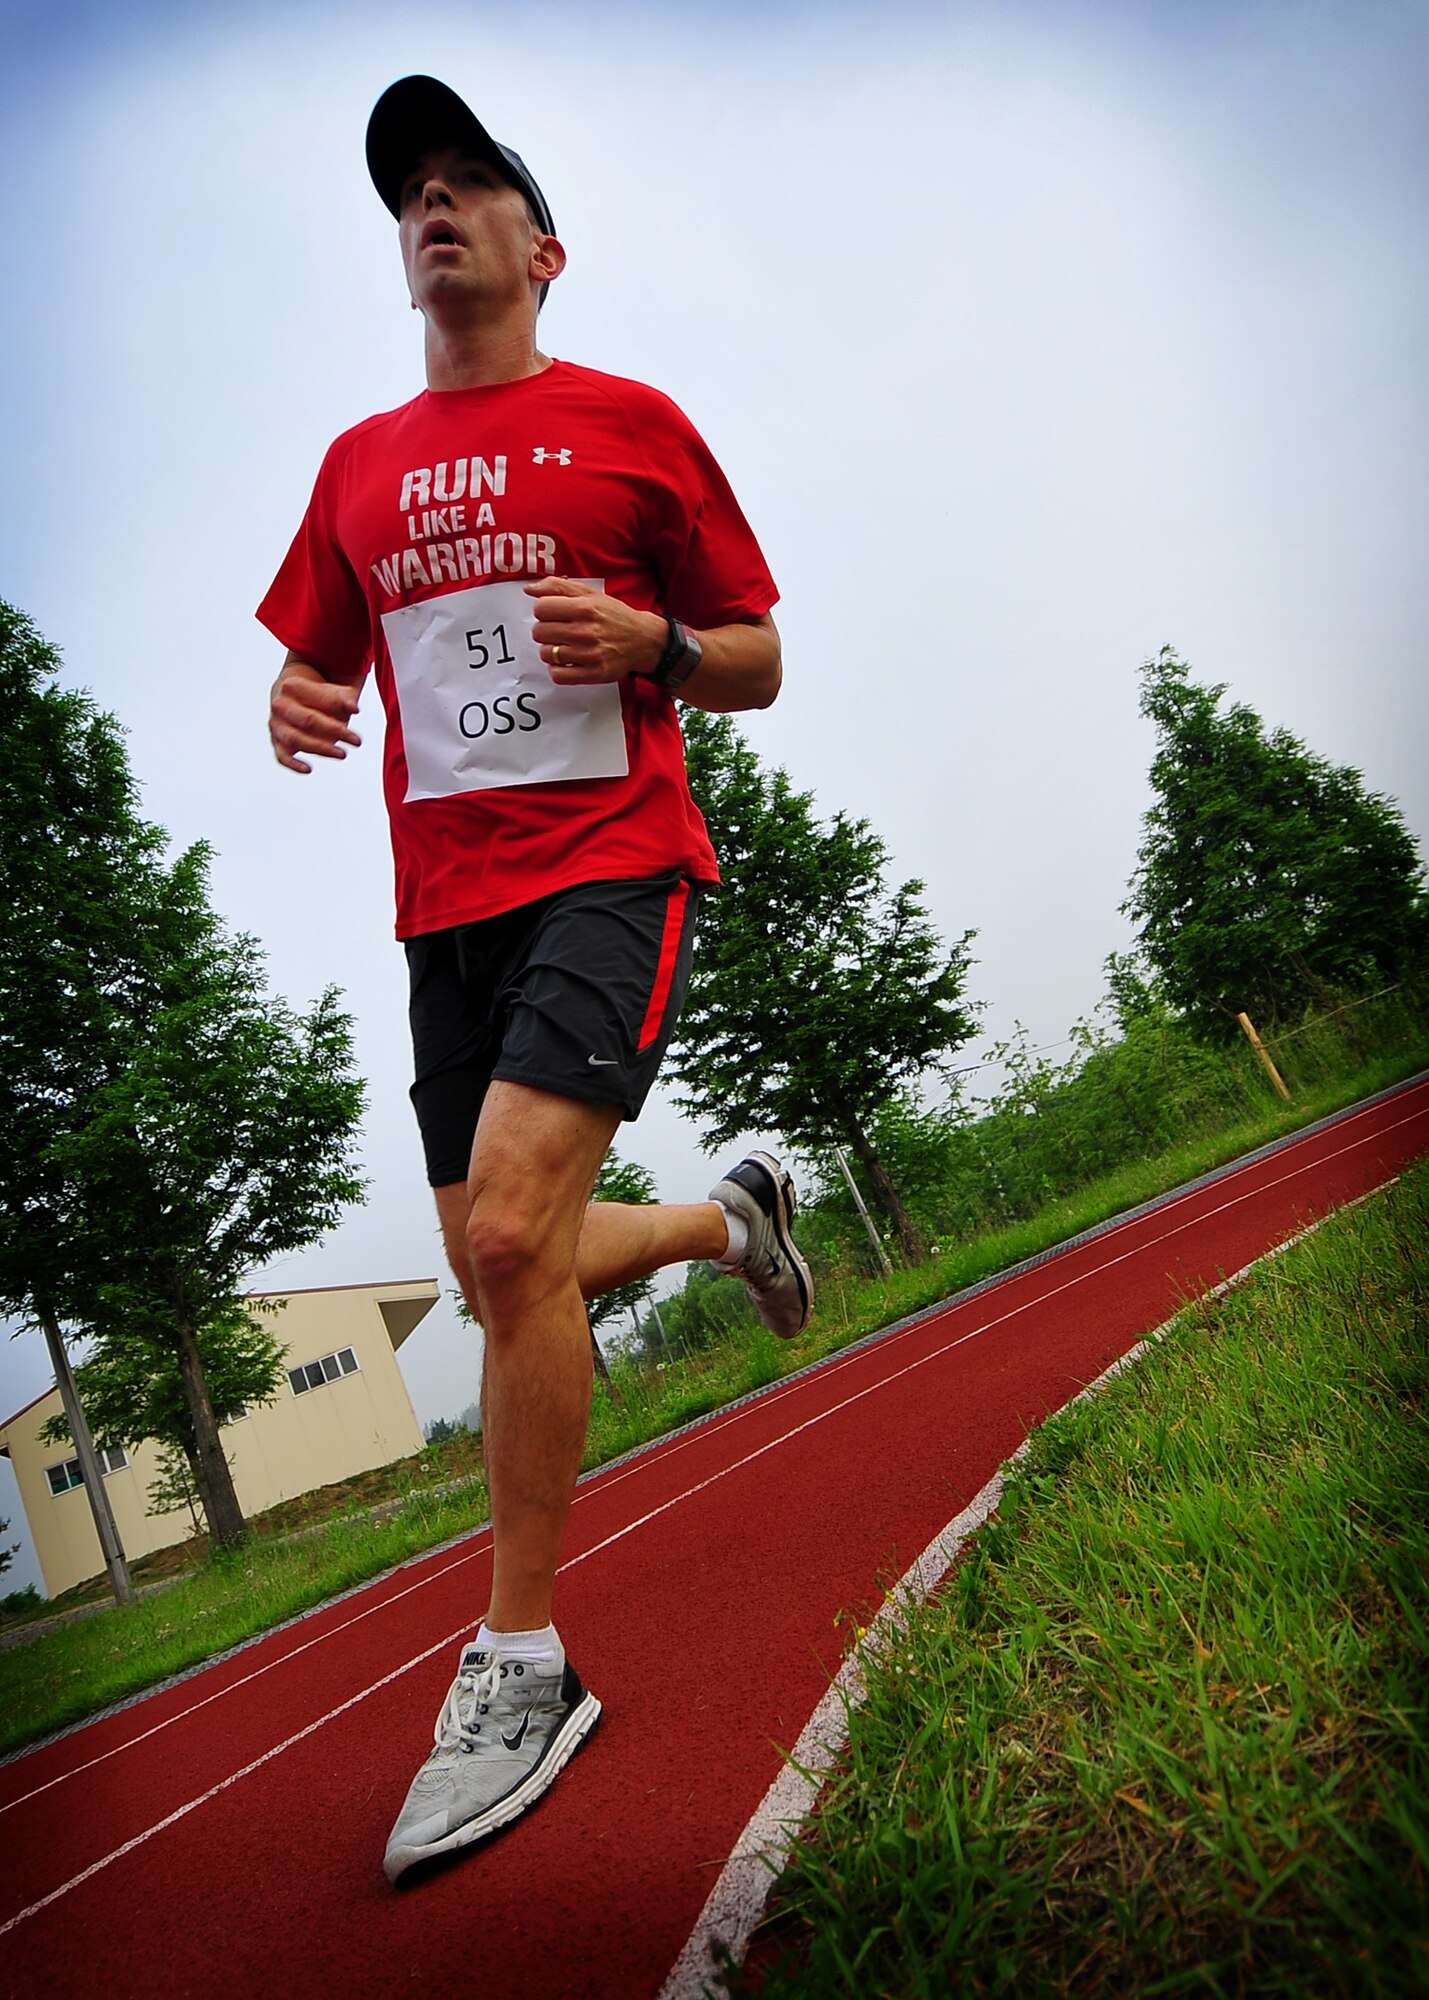 Major Bryan Meek, 51st Wing Safety, runs a lap around the track during the Osan Air Base 10 hour run June 10.  The purpose of the run was to raise money through donations for Japan relief efforts and boost troop morale.  (U.S. Air Force photo/Senior Airman Evelyn Chavez)